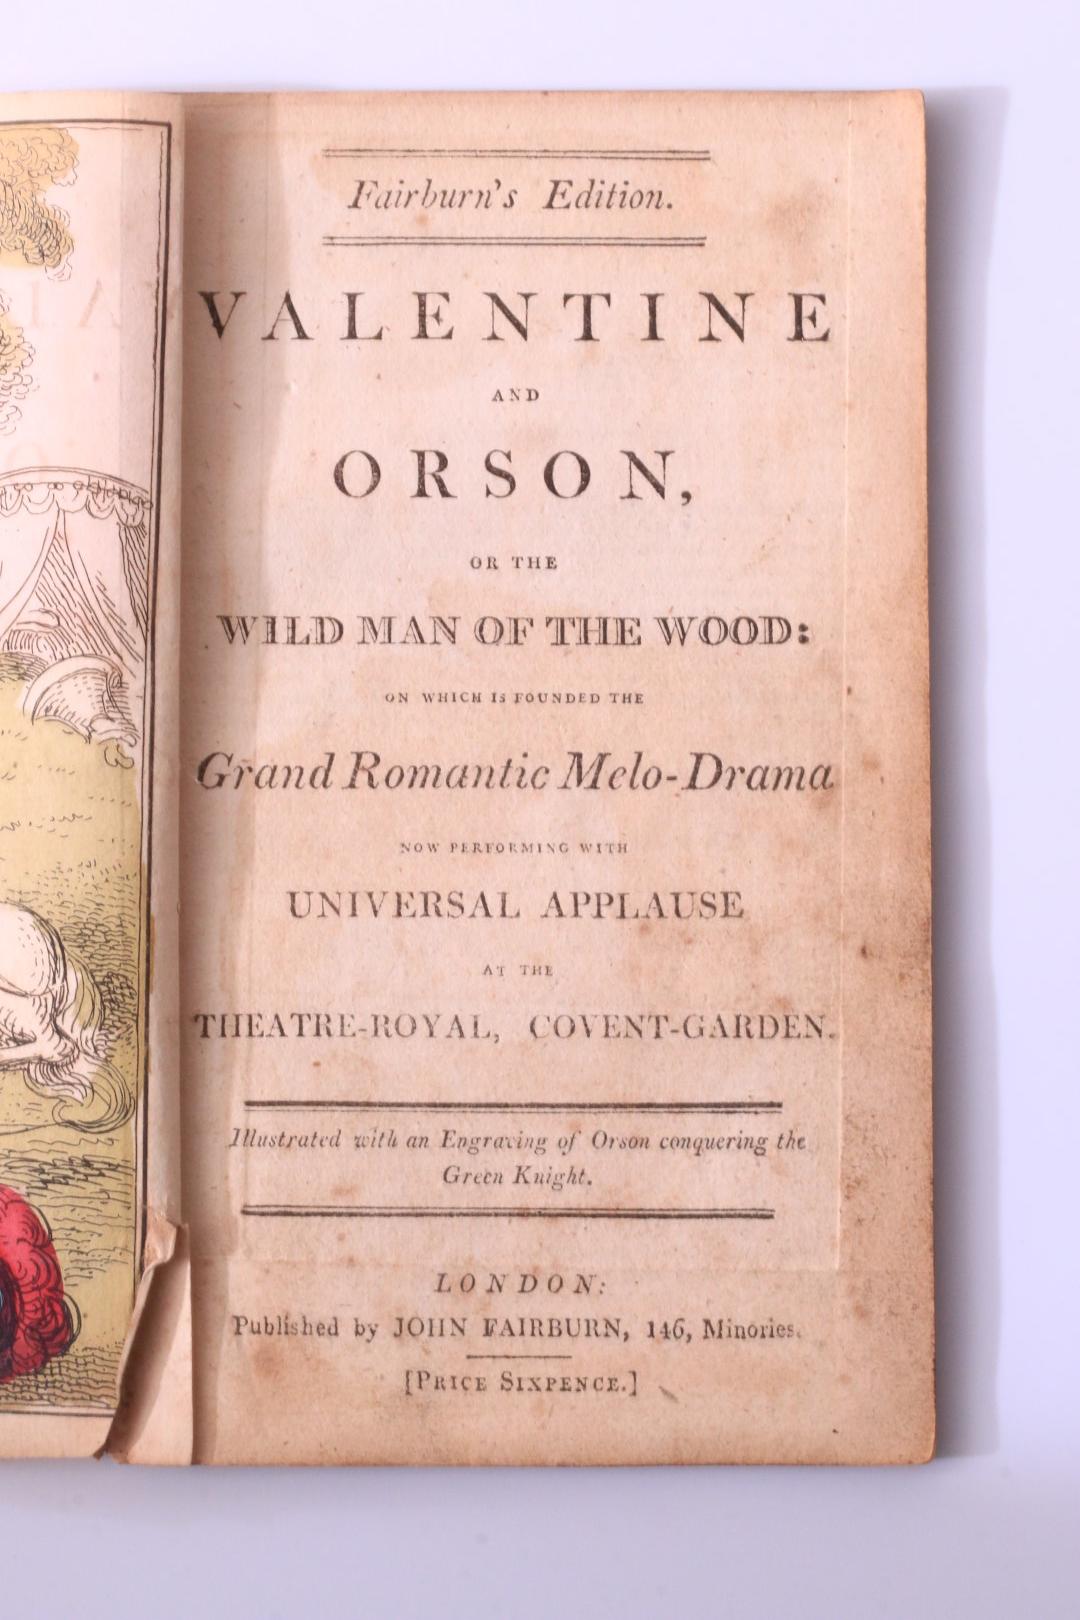 Anonymous - The History of Valentine and Orson : or the Wild Man of the Wood. - John Fairburn, n.d. [c1817?], Later Edition.